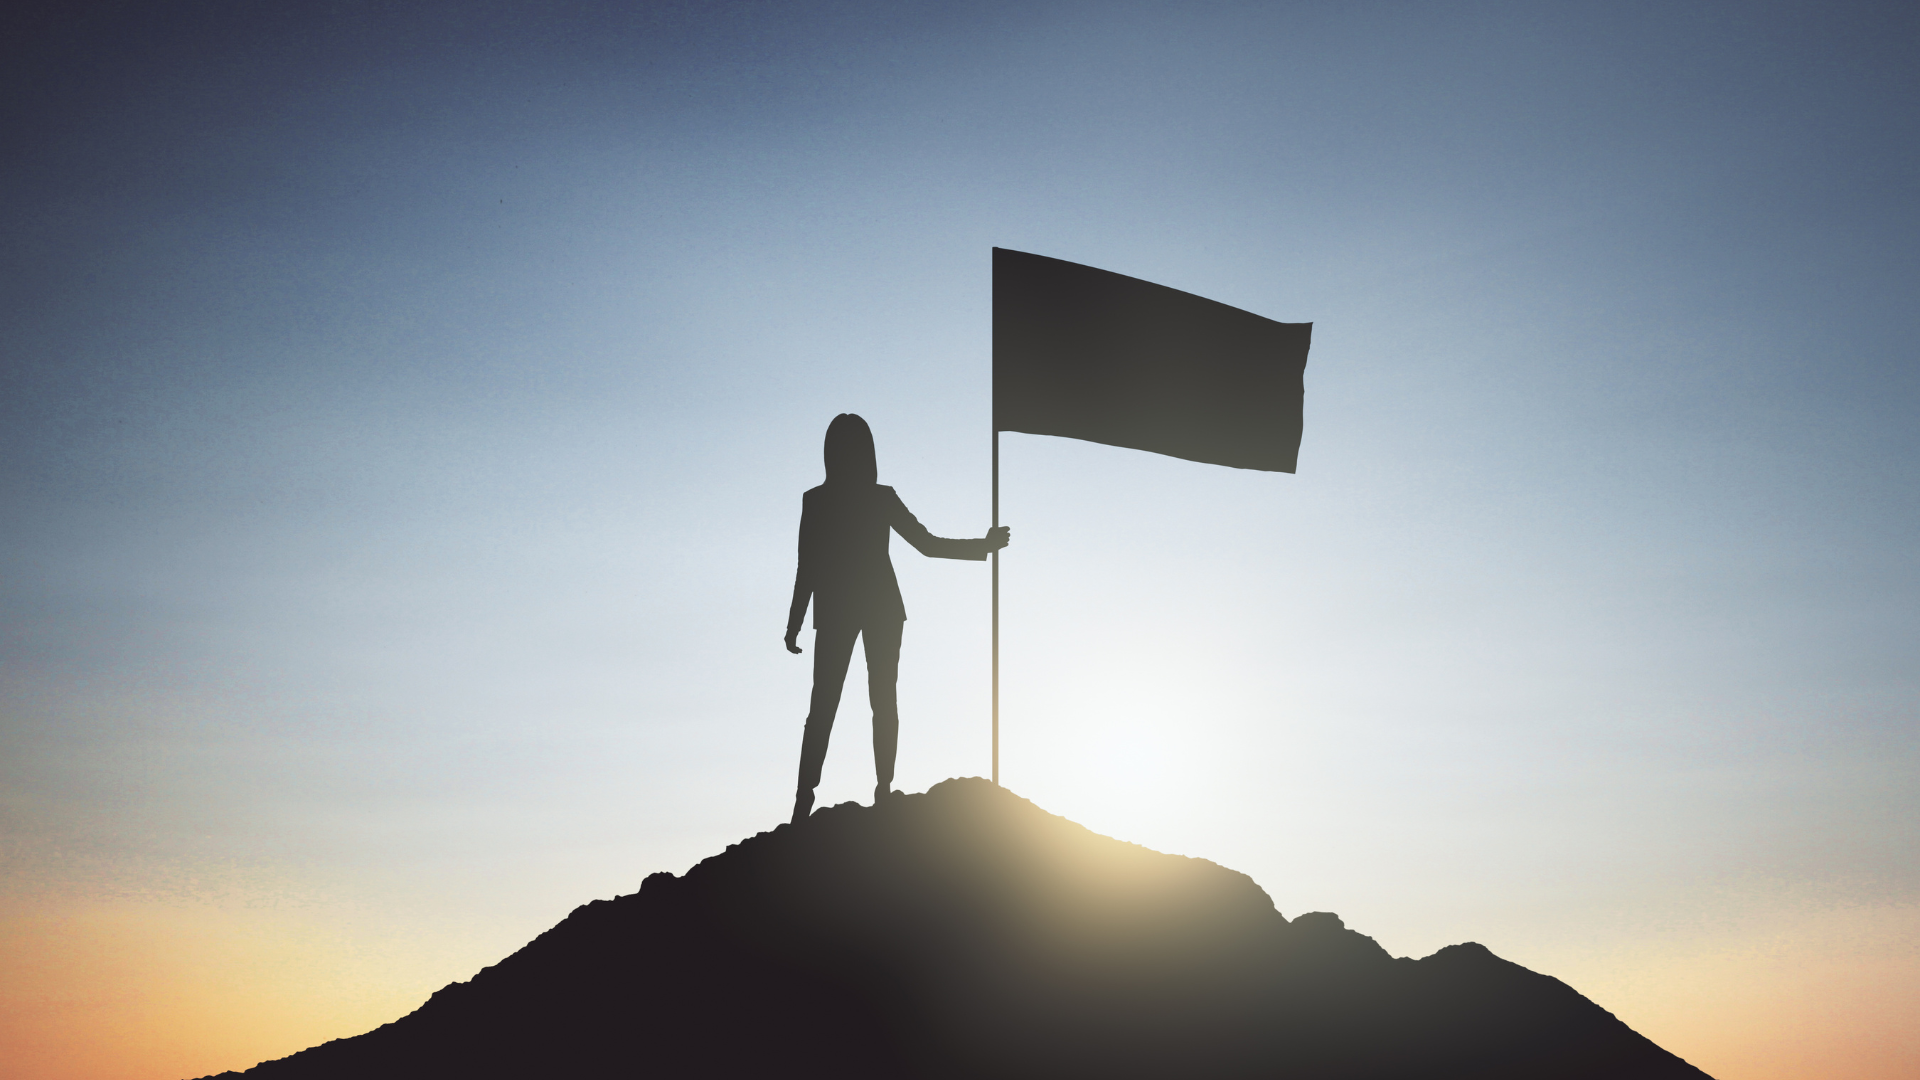 An image representing the spirit of achievement and success in the web design section of Rawlings Media's website. It features the silhouette of a woman standing triumphantly on the top of a mountain, holding a flag. The image symbolizes the ability of Rawlings Media to transform your ambitions into a captivating online presence and bring your ideas to new heights.